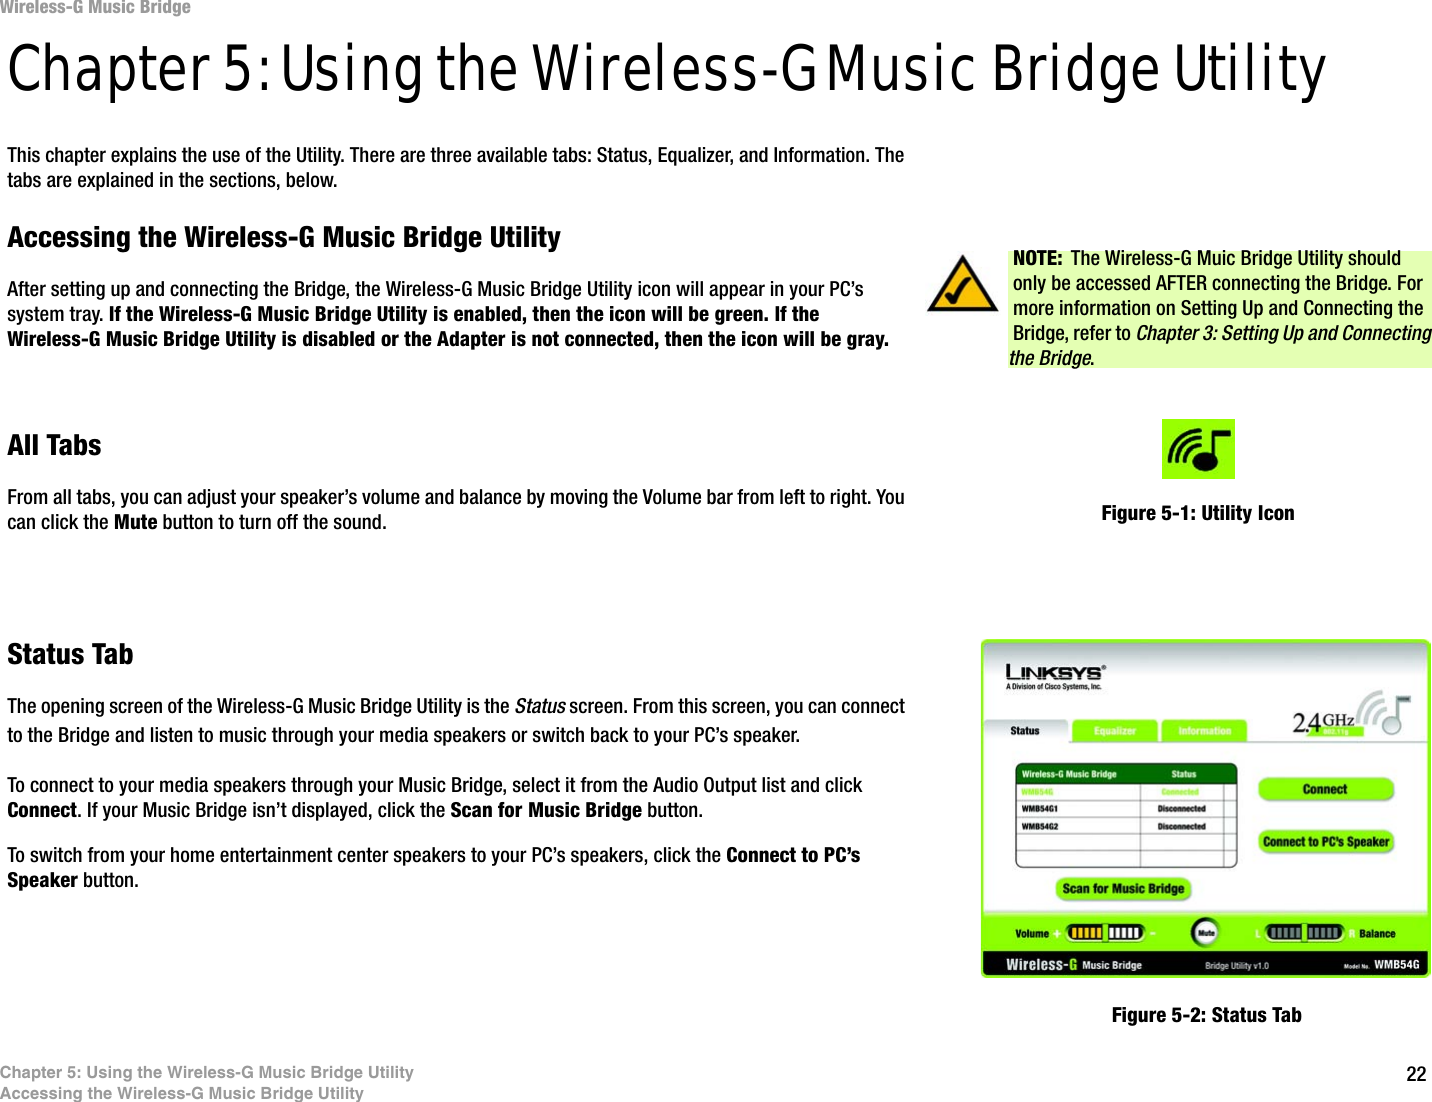 22Chapter 5: Using the Wireless-G Music Bridge UtilityAccessing the Wireless-G Music Bridge UtilityWireless-G Music BridgeChapter 5: Using the Wireless-G Music Bridge UtilityThis chapter explains the use of the Utility. There are three available tabs: Status, Equalizer, and Information. The tabs are explained in the sections, below.Accessing the Wireless-G Music Bridge UtilityAfter setting up and connecting the Bridge, the Wireless-G Music Bridge Utility icon will appear in your PC’s system tray. If the Wireless-G Music Bridge Utility is enabled, then the icon will be green. If the Wireless-G Music Bridge Utility is disabled or the Adapter is not connected, then the icon will be gray.All TabsFrom all tabs, you can adjust your speaker’s volume and balance by moving the Volume bar from left to right. You can click the Mute button to turn off the sound.Status TabThe opening screen of the Wireless-G Music Bridge Utility is the Status screen. From this screen, you can connect to the Bridge and listen to music through your media speakers or switch back to your PC’s speaker. To connect to your media speakers through your Music Bridge, select it from the Audio Output list and click Connect. If your Music Bridge isn’t displayed, click the Scan for Music Bridge button.To switch from your home entertainment center speakers to your PC’s speakers, click the Connect to PC’s Speaker button. Figure 5-1: Utility IconFigure 5-2: Status TabNOTE: The Wireless-G Muic Bridge Utility should only be accessed AFTER connecting the Bridge. For more information on Setting Up and Connecting the Bridge, refer to Chapter 3: Setting Up and Connecting the Bridge.